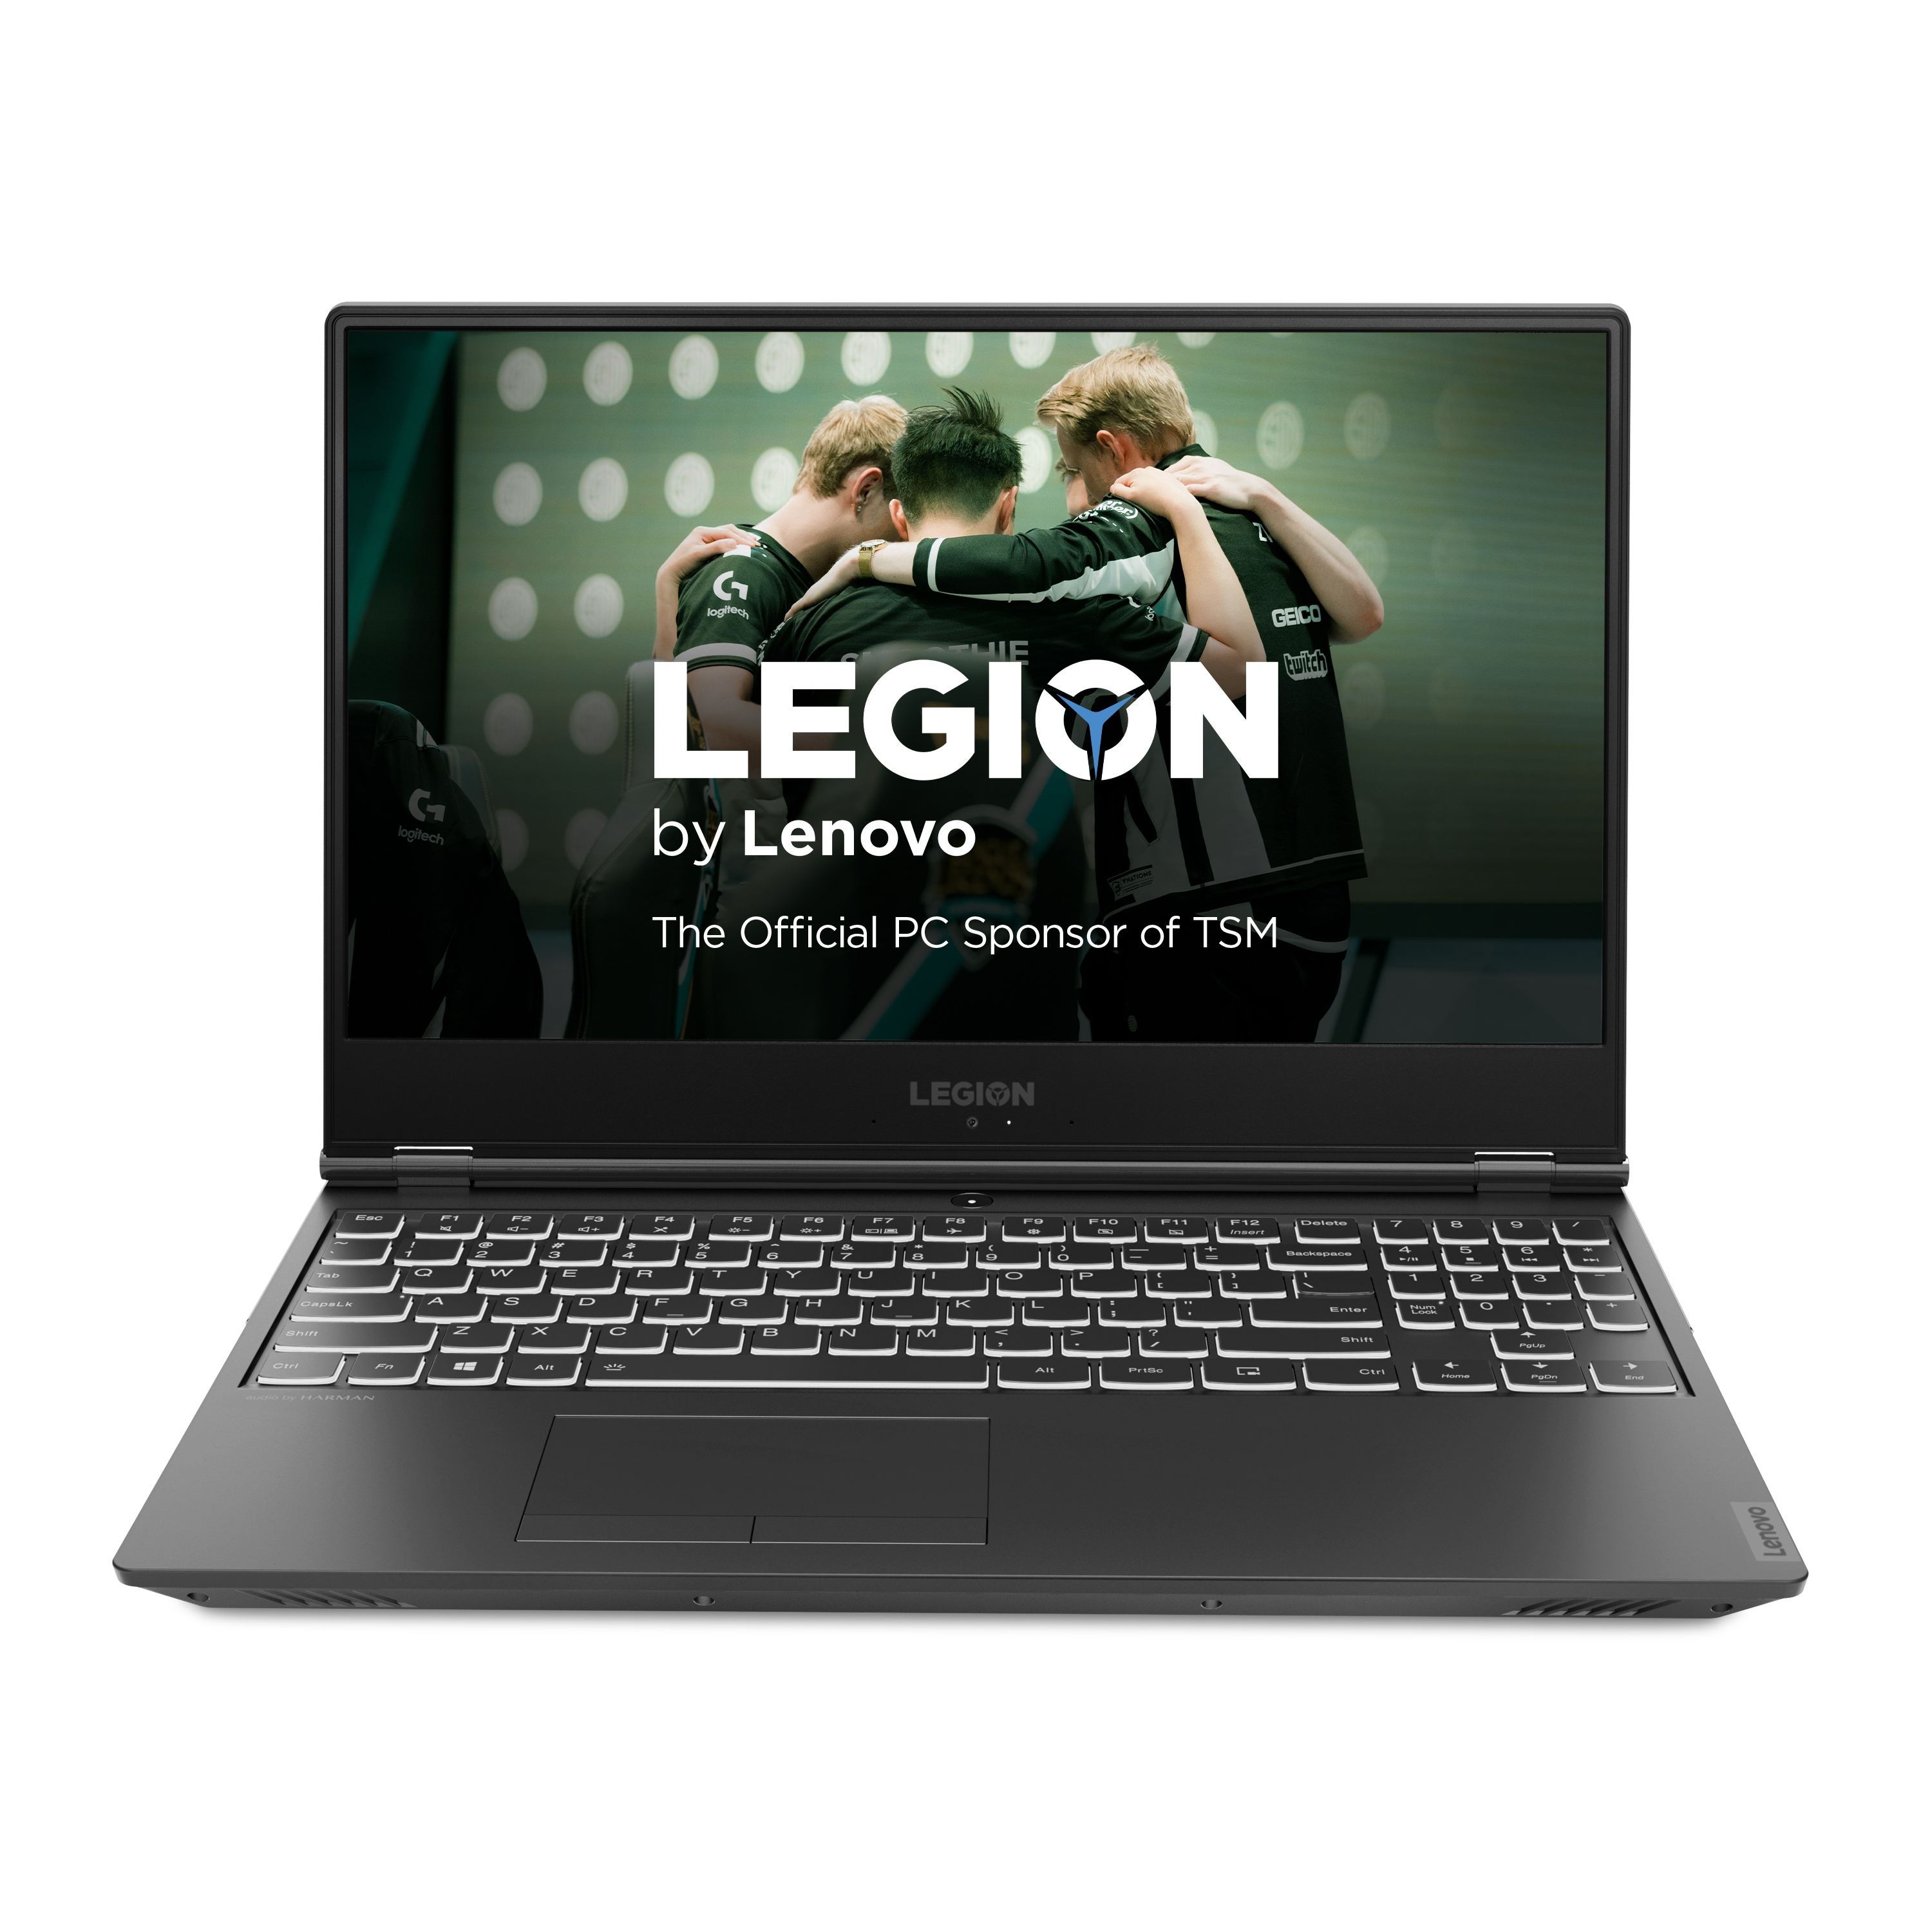 Lenovo Black Friday deals 2020 Up to 70 off laptops this week